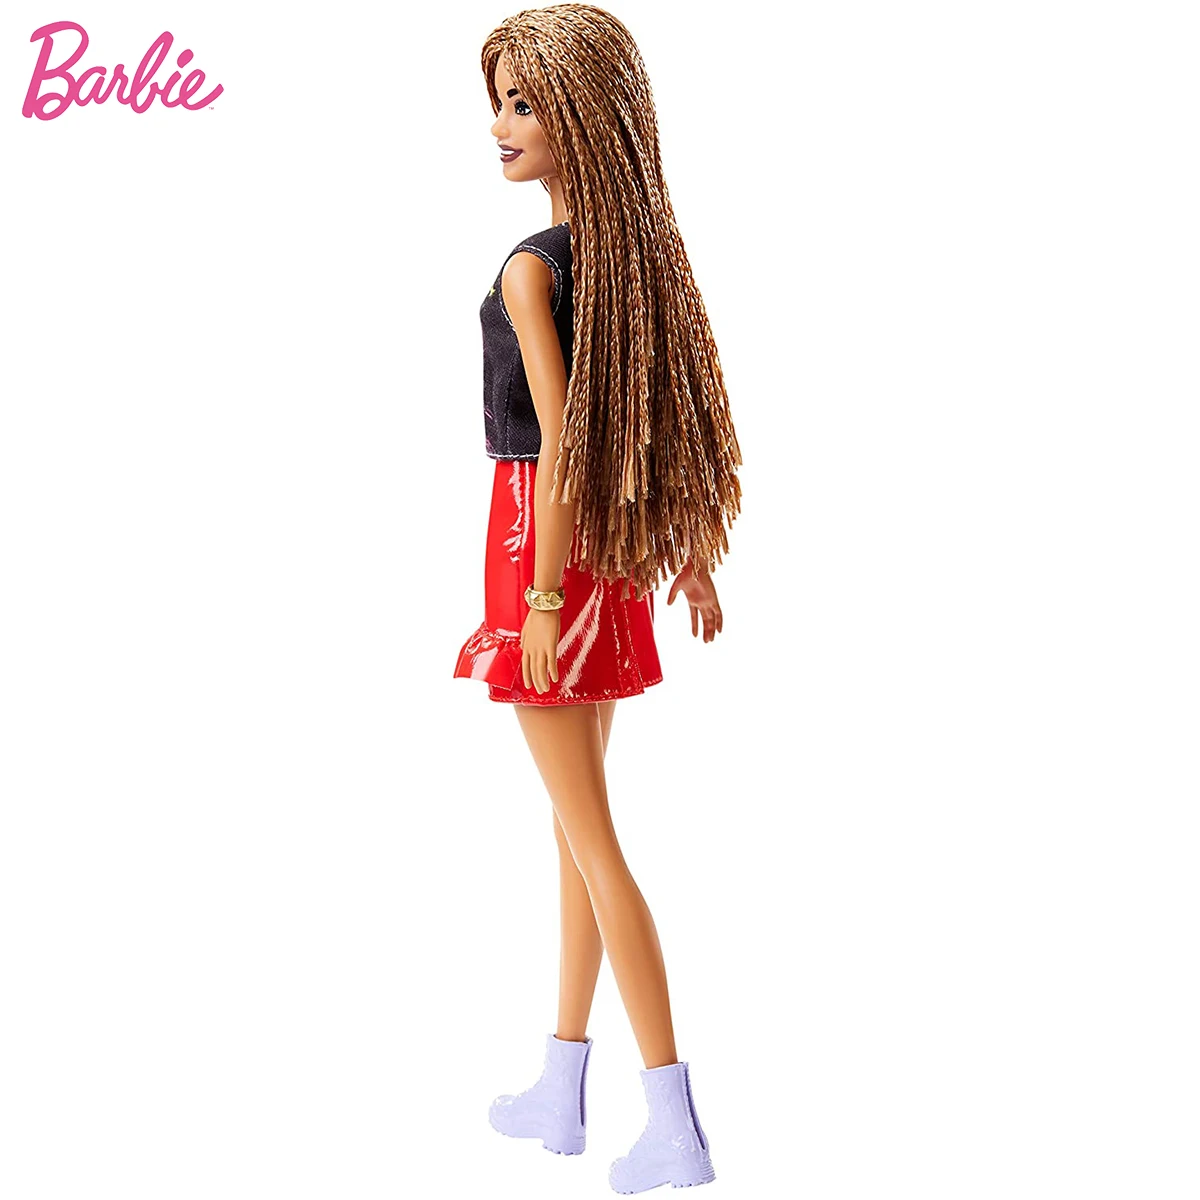 Details about   BARBIE DOLL ACCESSORY RED & BLACK CAMERA W/ NECK STRAP 